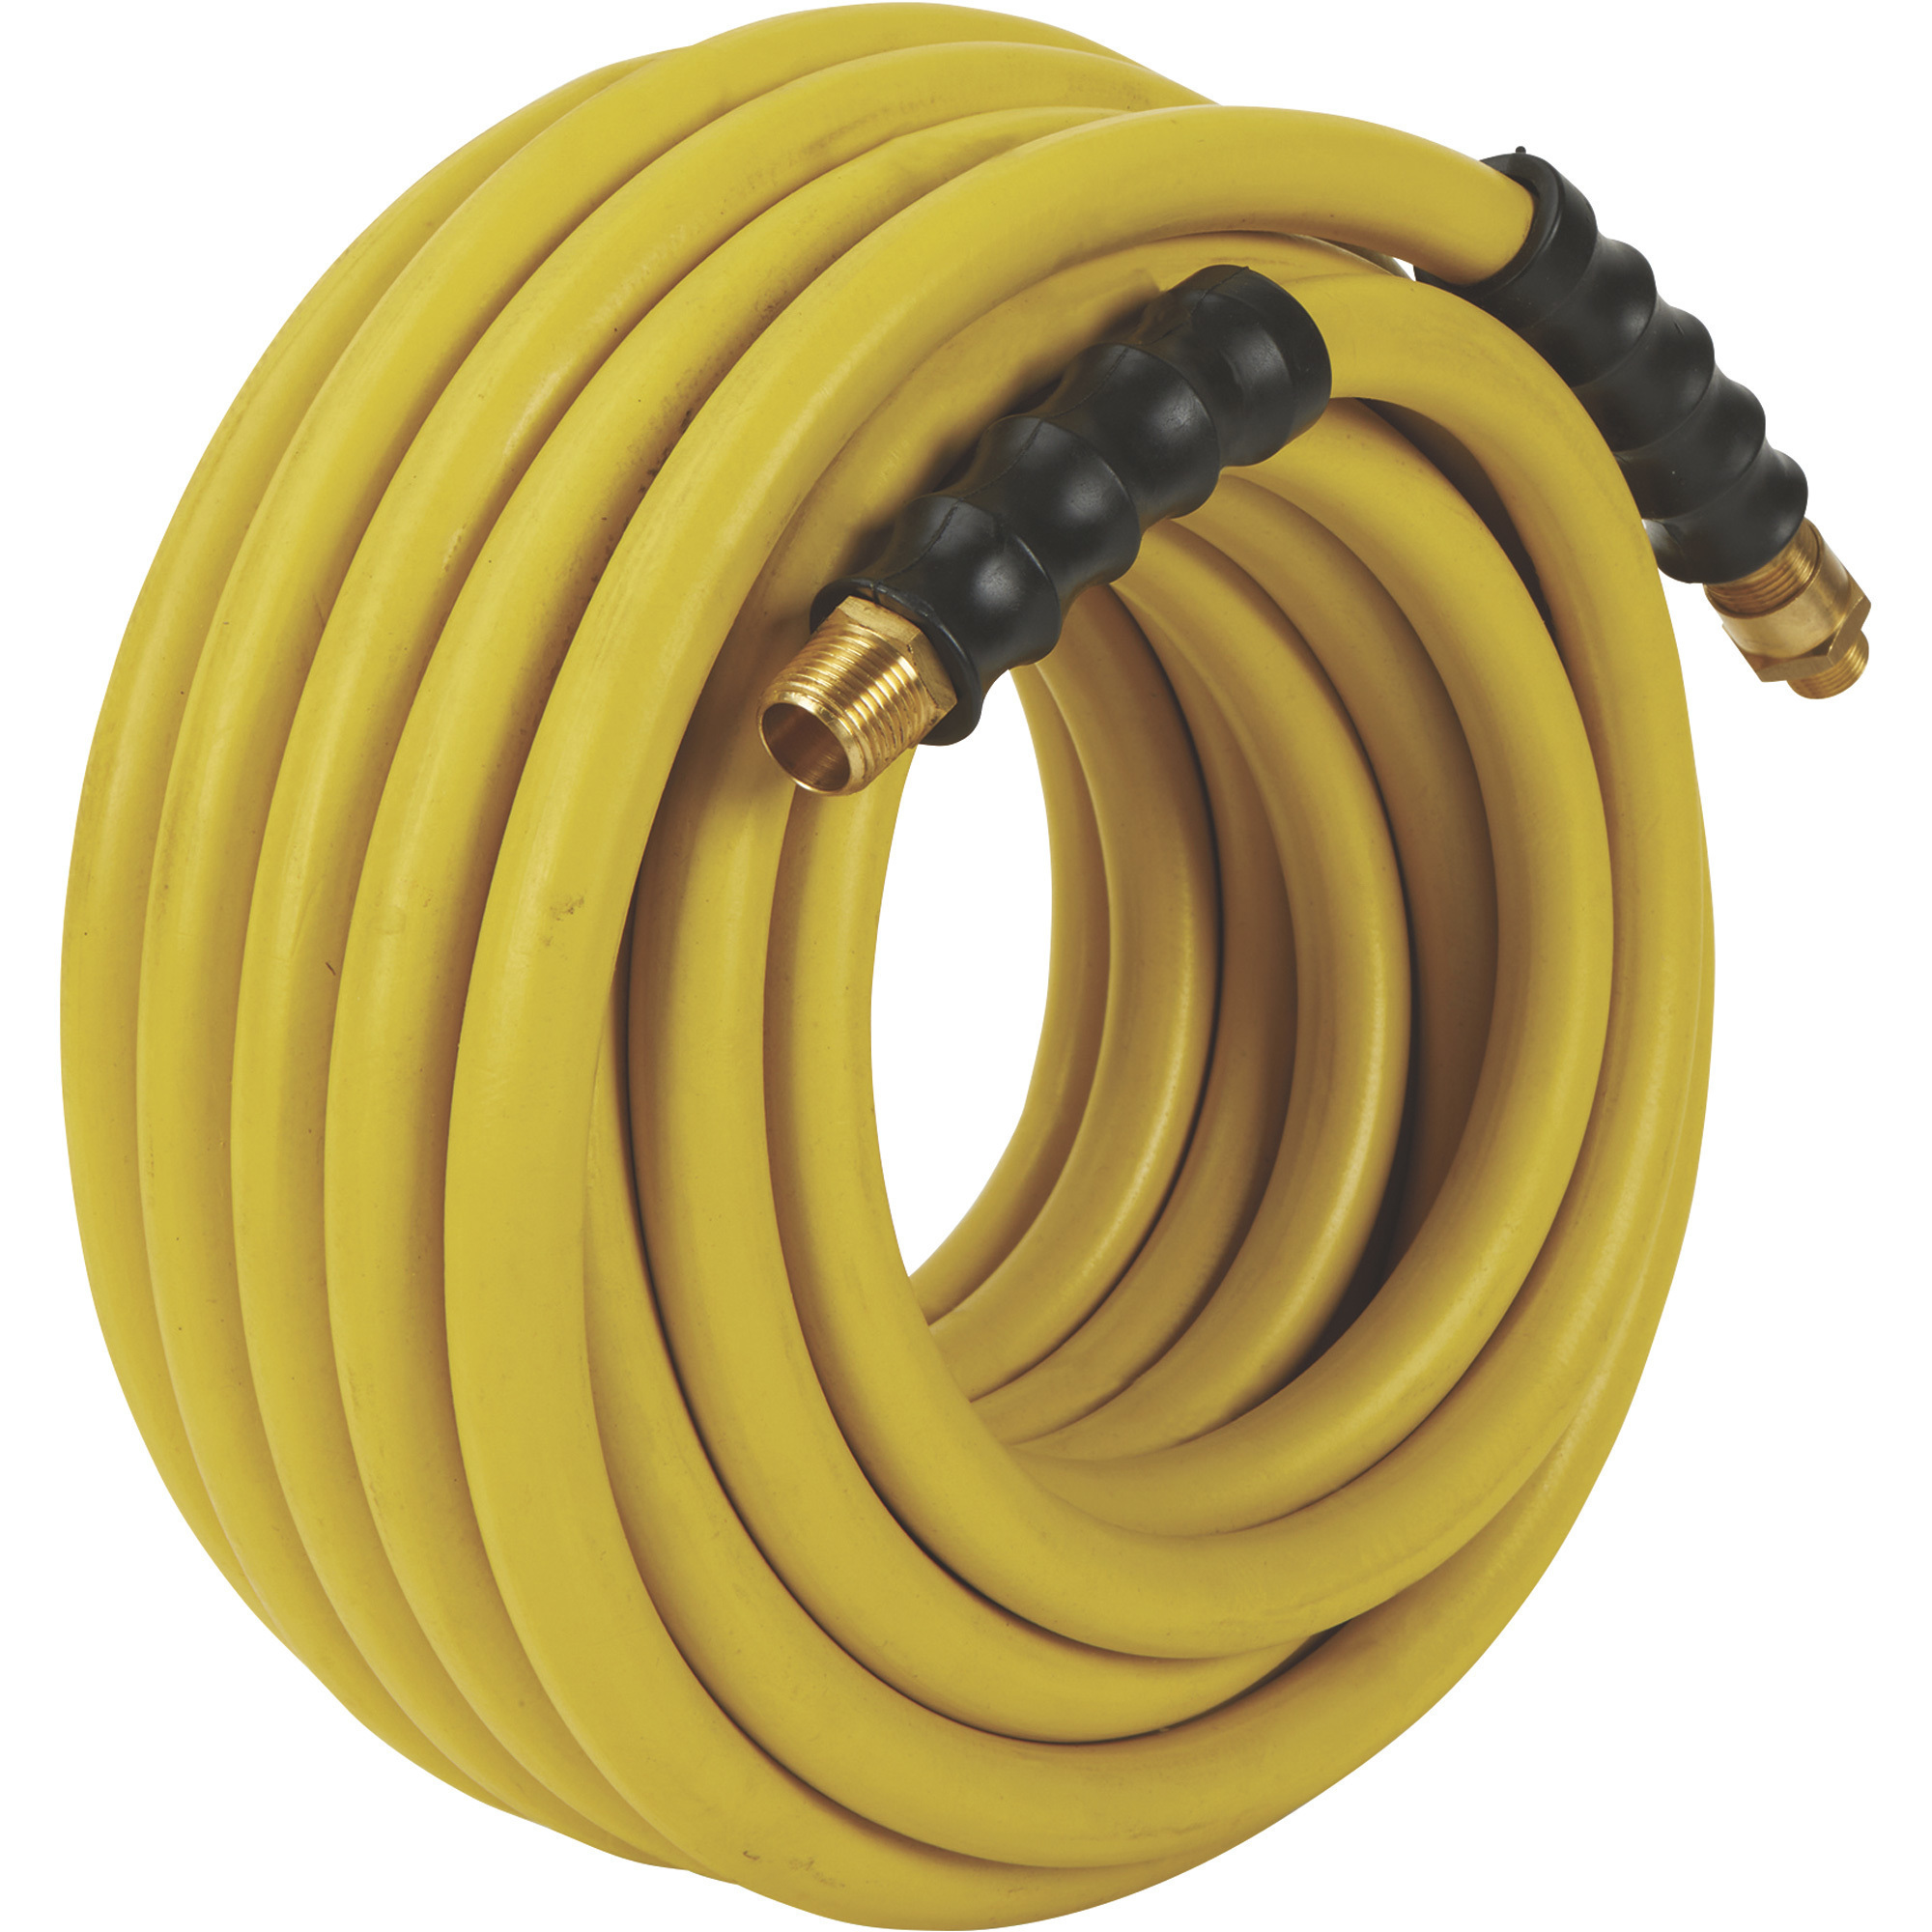 Klutch Oil-Resistant Rubber Air Hose, 1/2Inch x 100ft., with 1/2Inch-3/8Inch Reducer, 300 psi, Model OS12100-NT